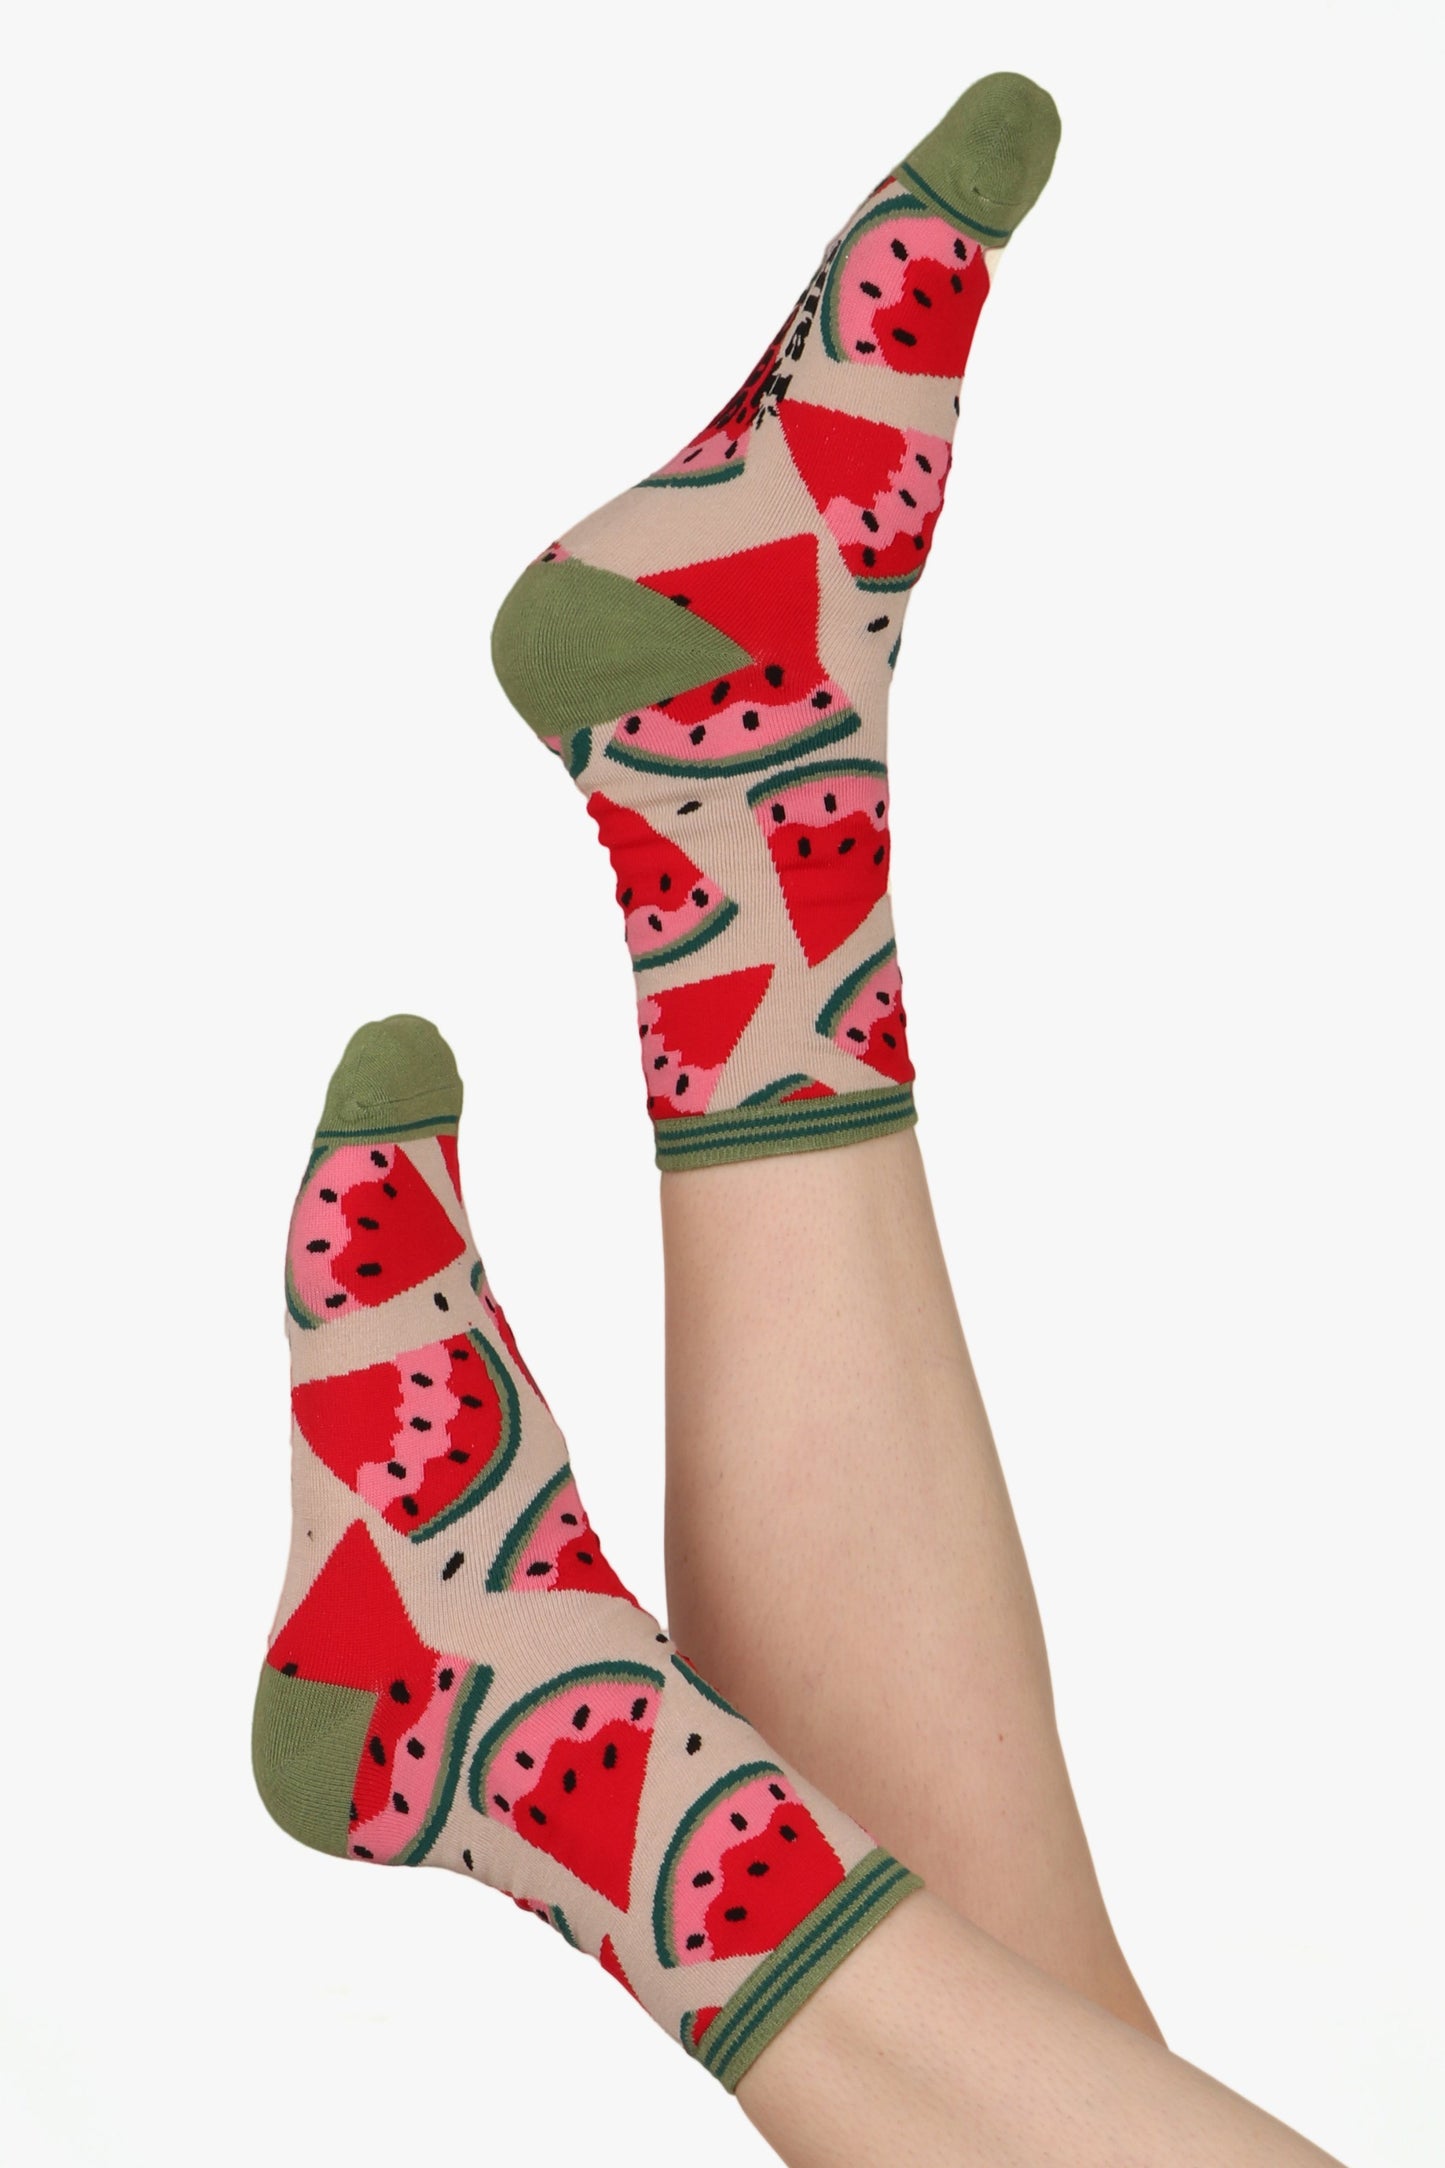 Ladies feet in the air wearing watermelon print socks with contrasting green toe, heel and cuff detail